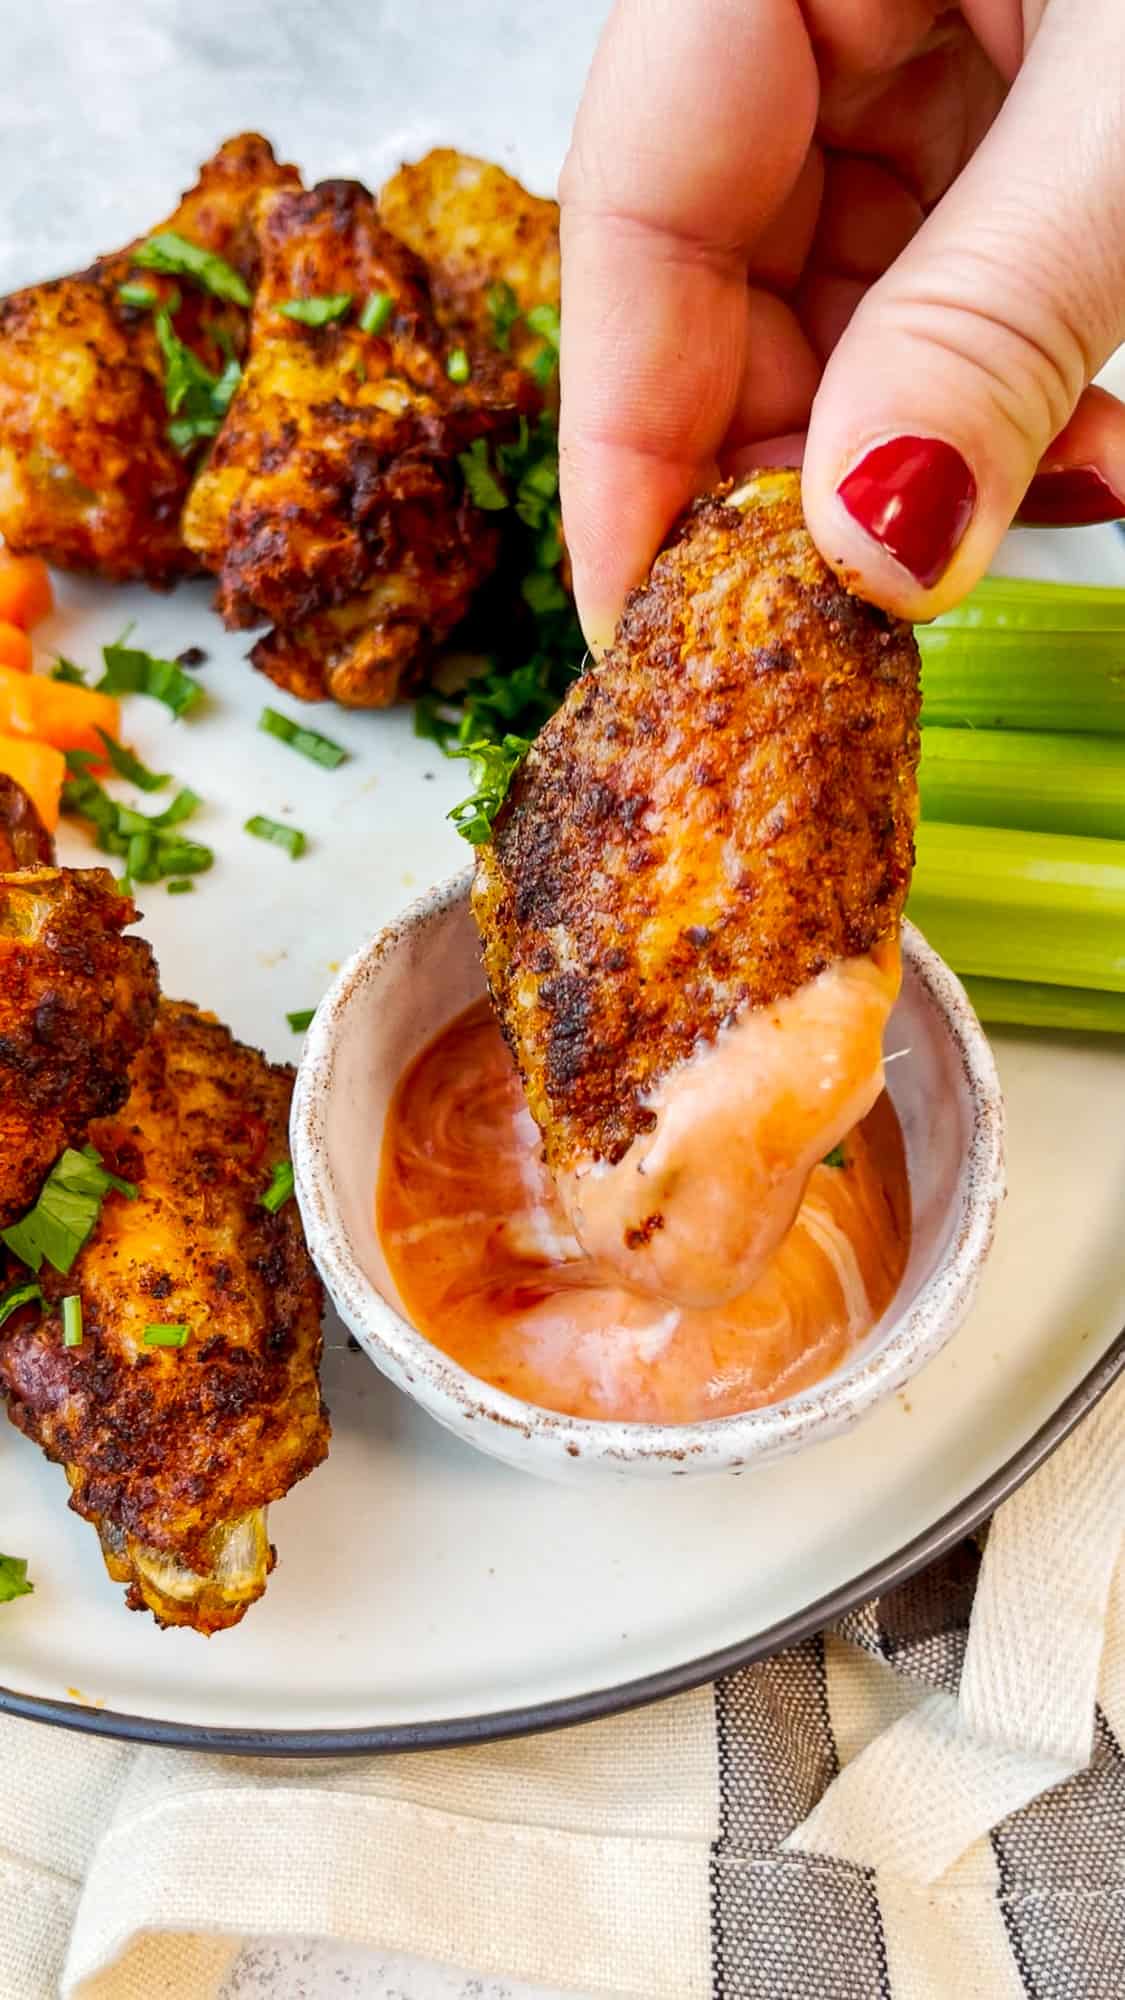 A hand dipping a chicken wing in a dipping sauce.